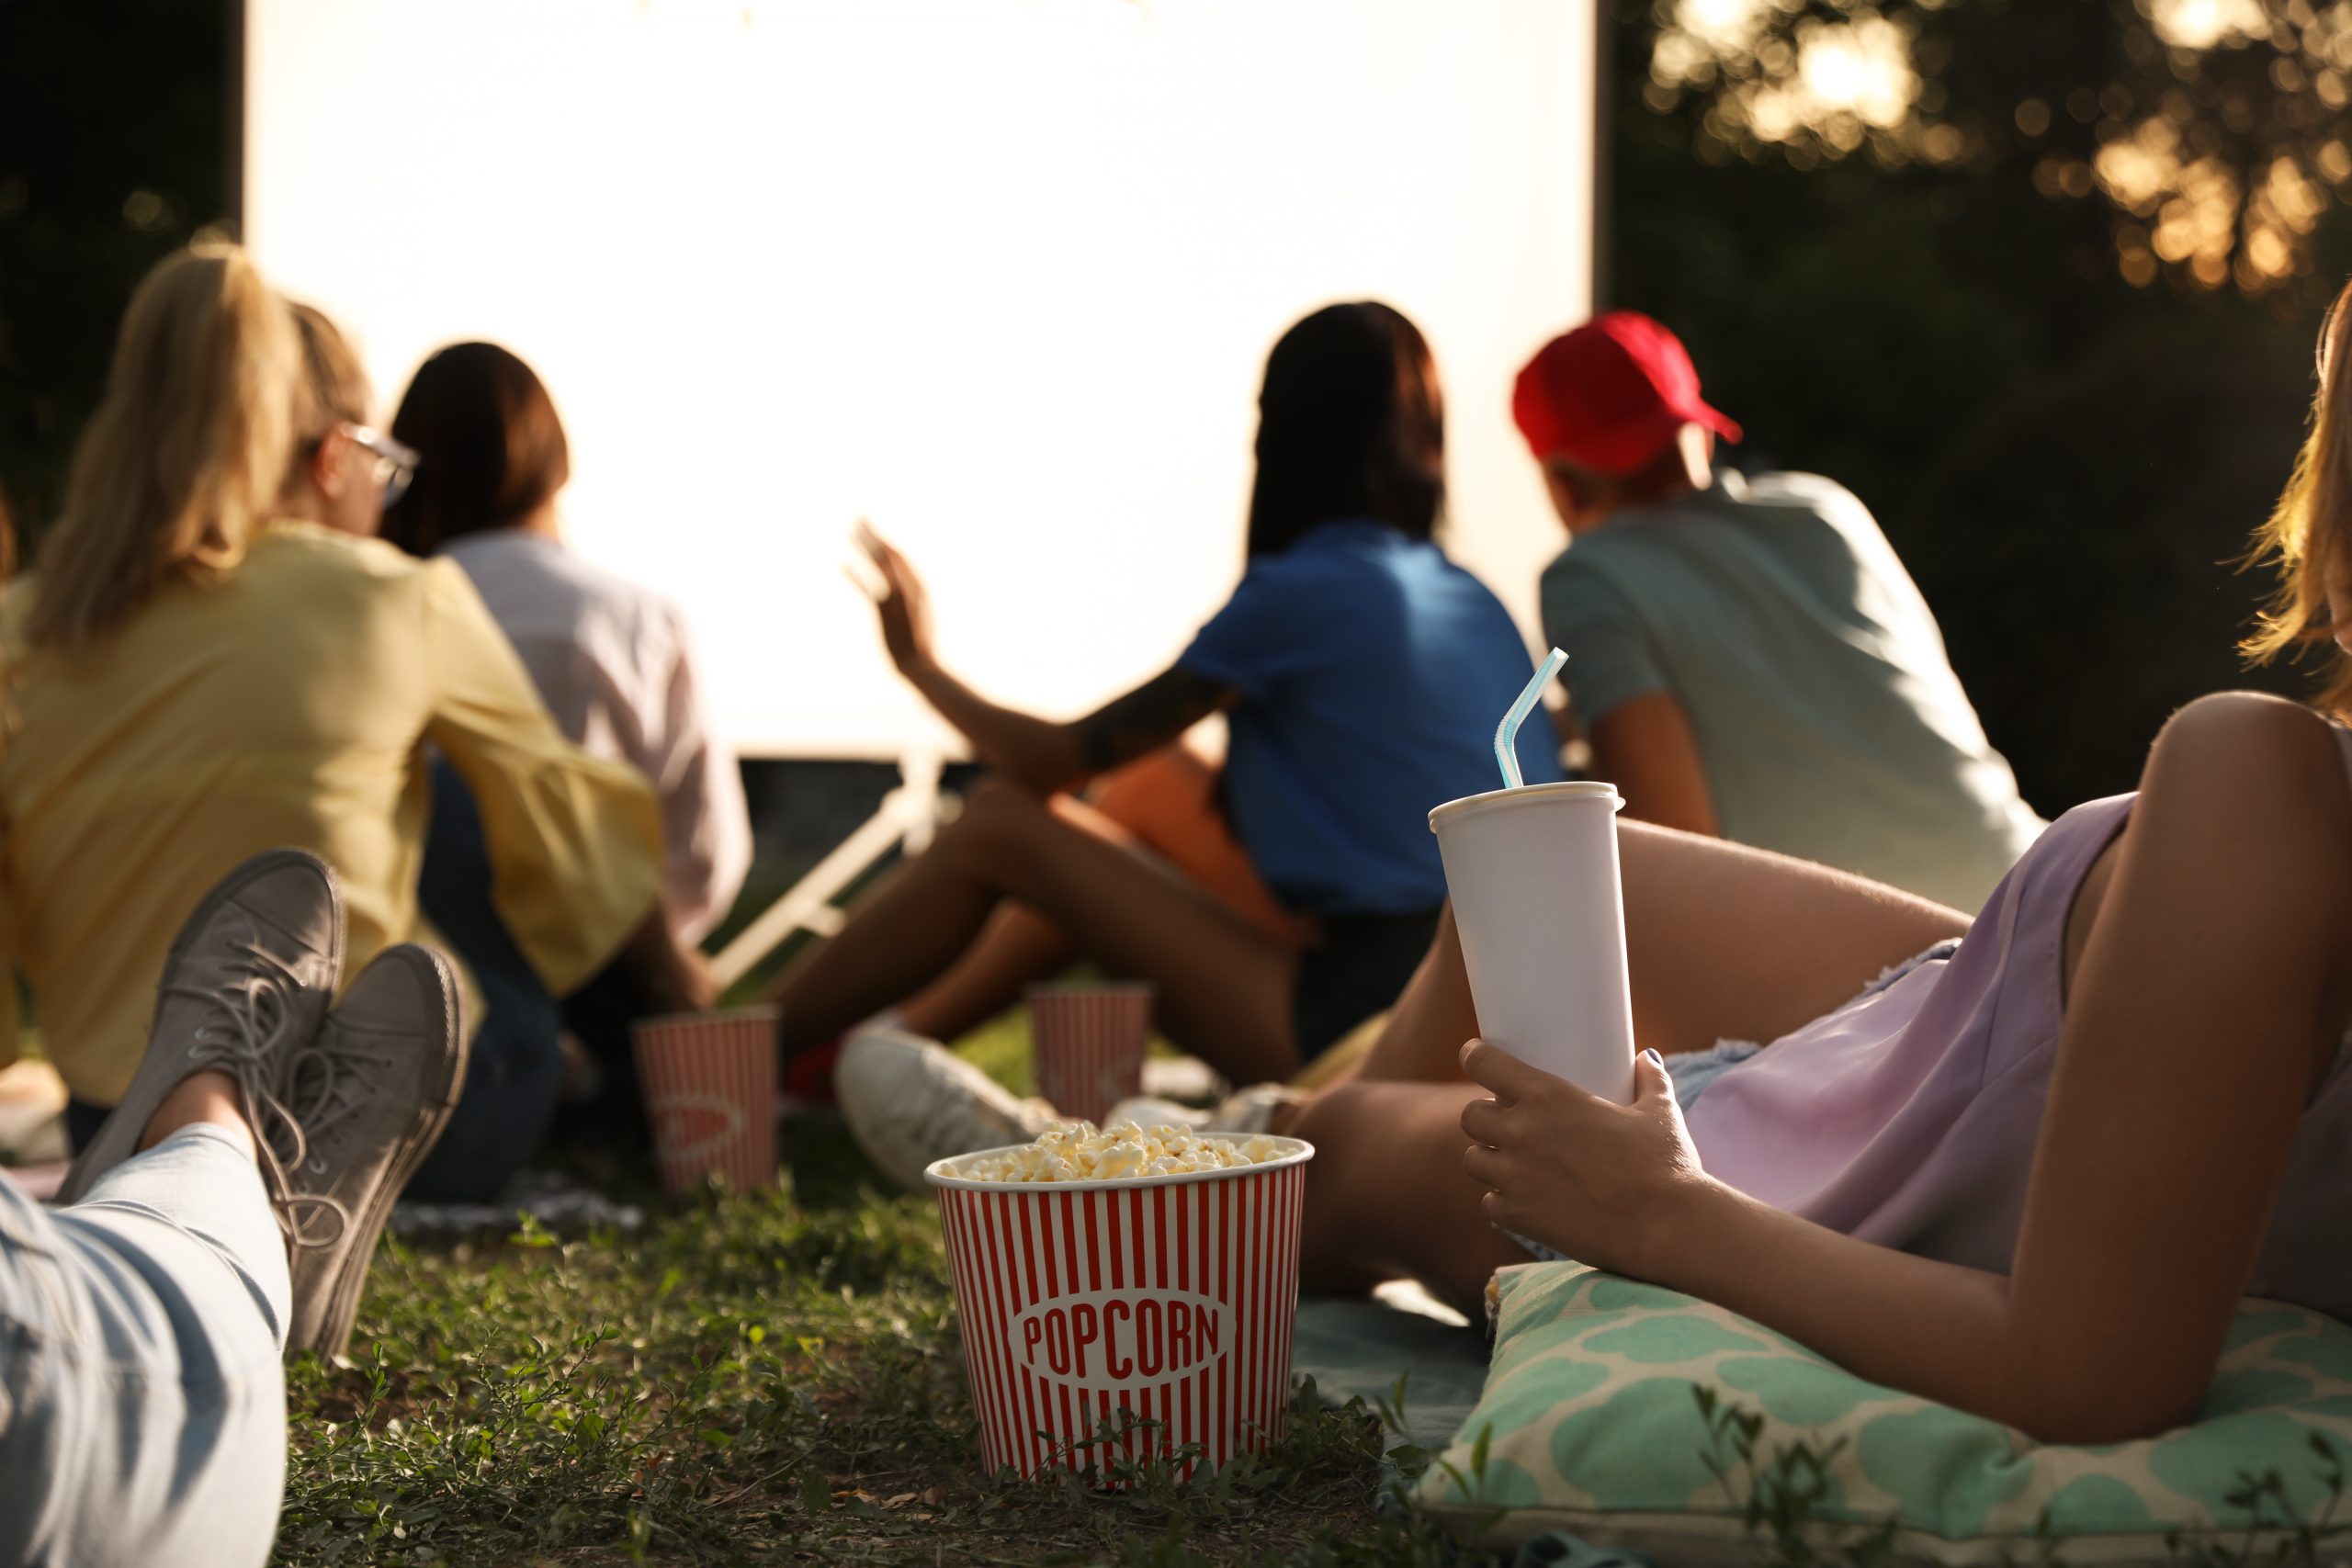 Have an outdoor movie night